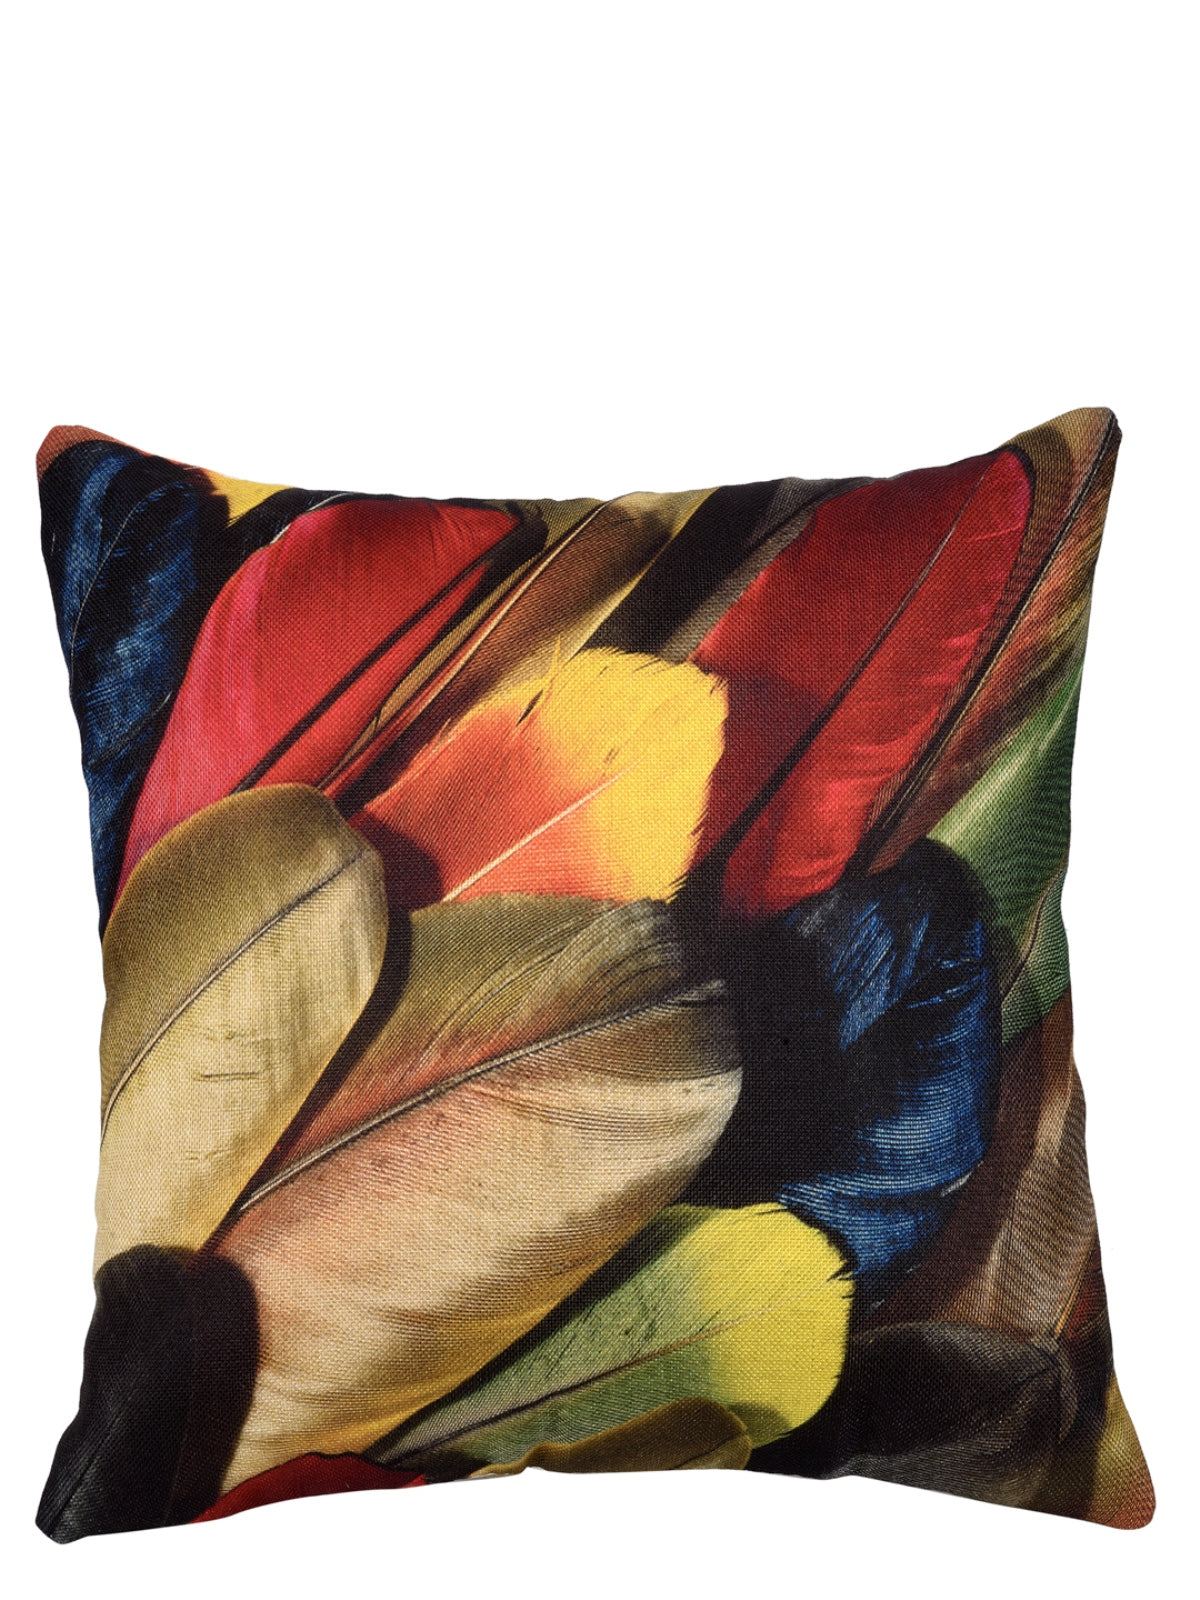 Polyester Jute Feather Printed Cushion Covers 16 inch x 16 inch, Set of 5 - Multicolor